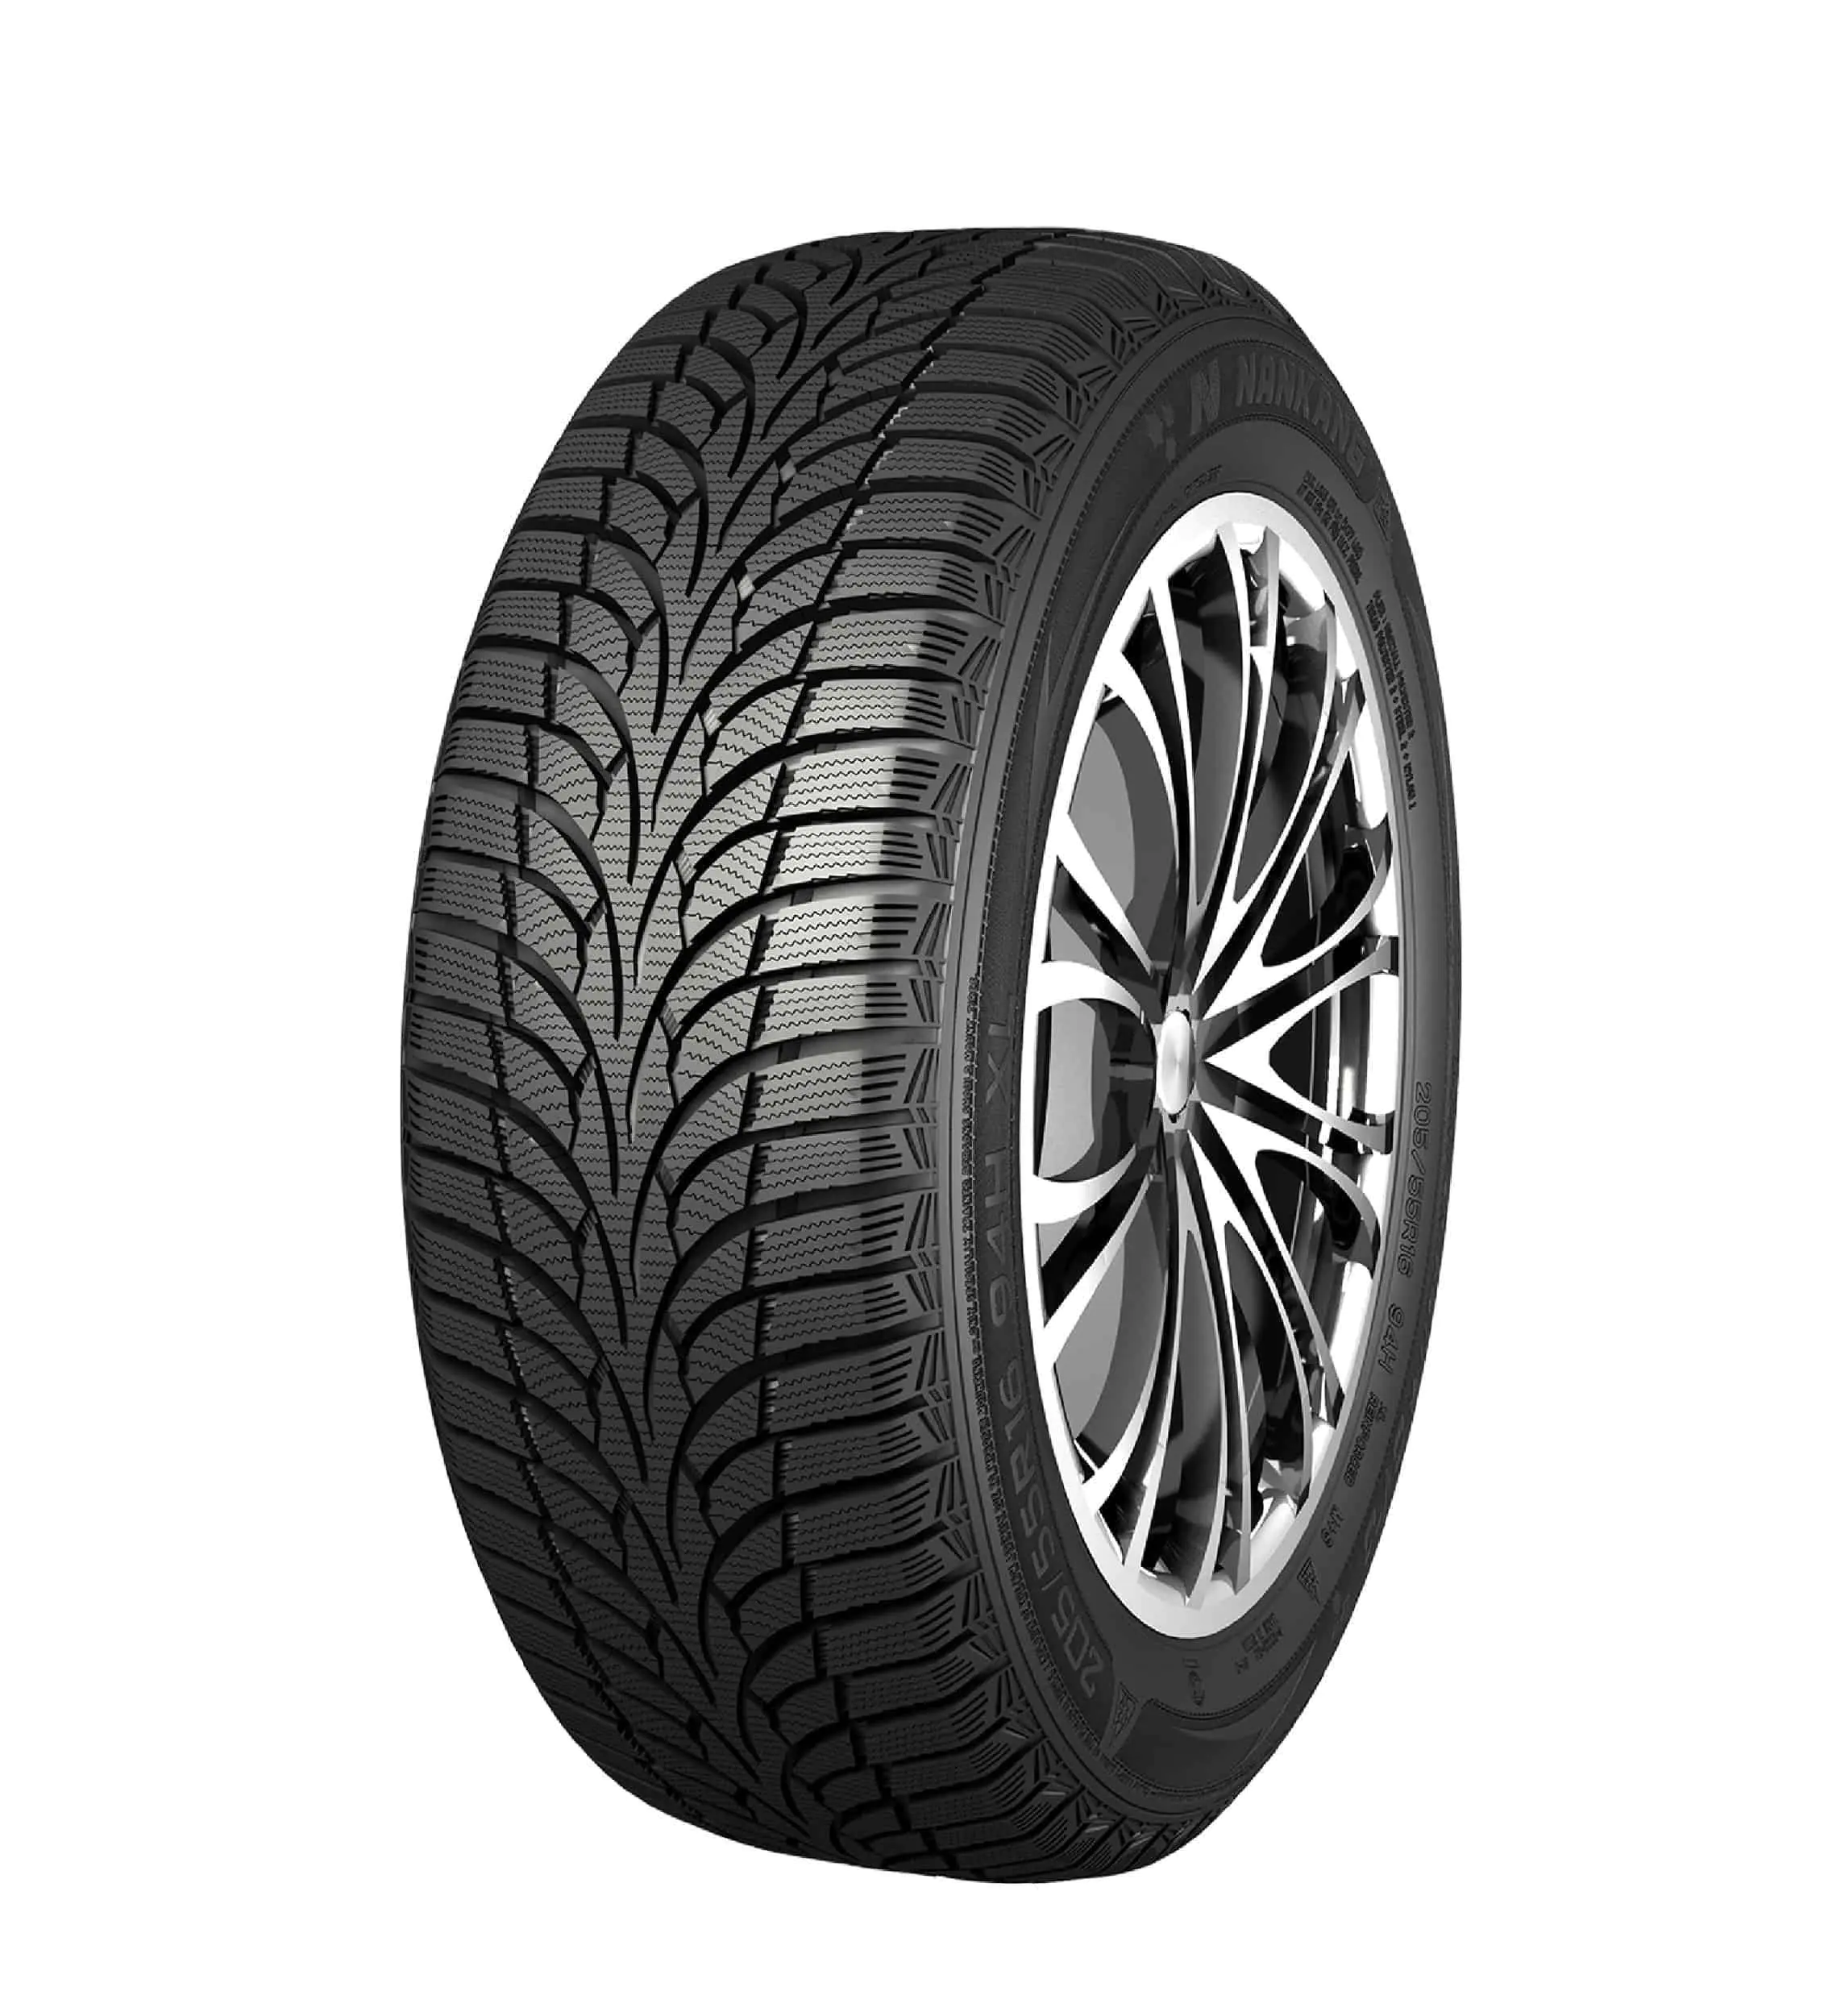 Gomme 4x4 Suv Nankang 195/80 R15 96T SV-3 M+S Invernale